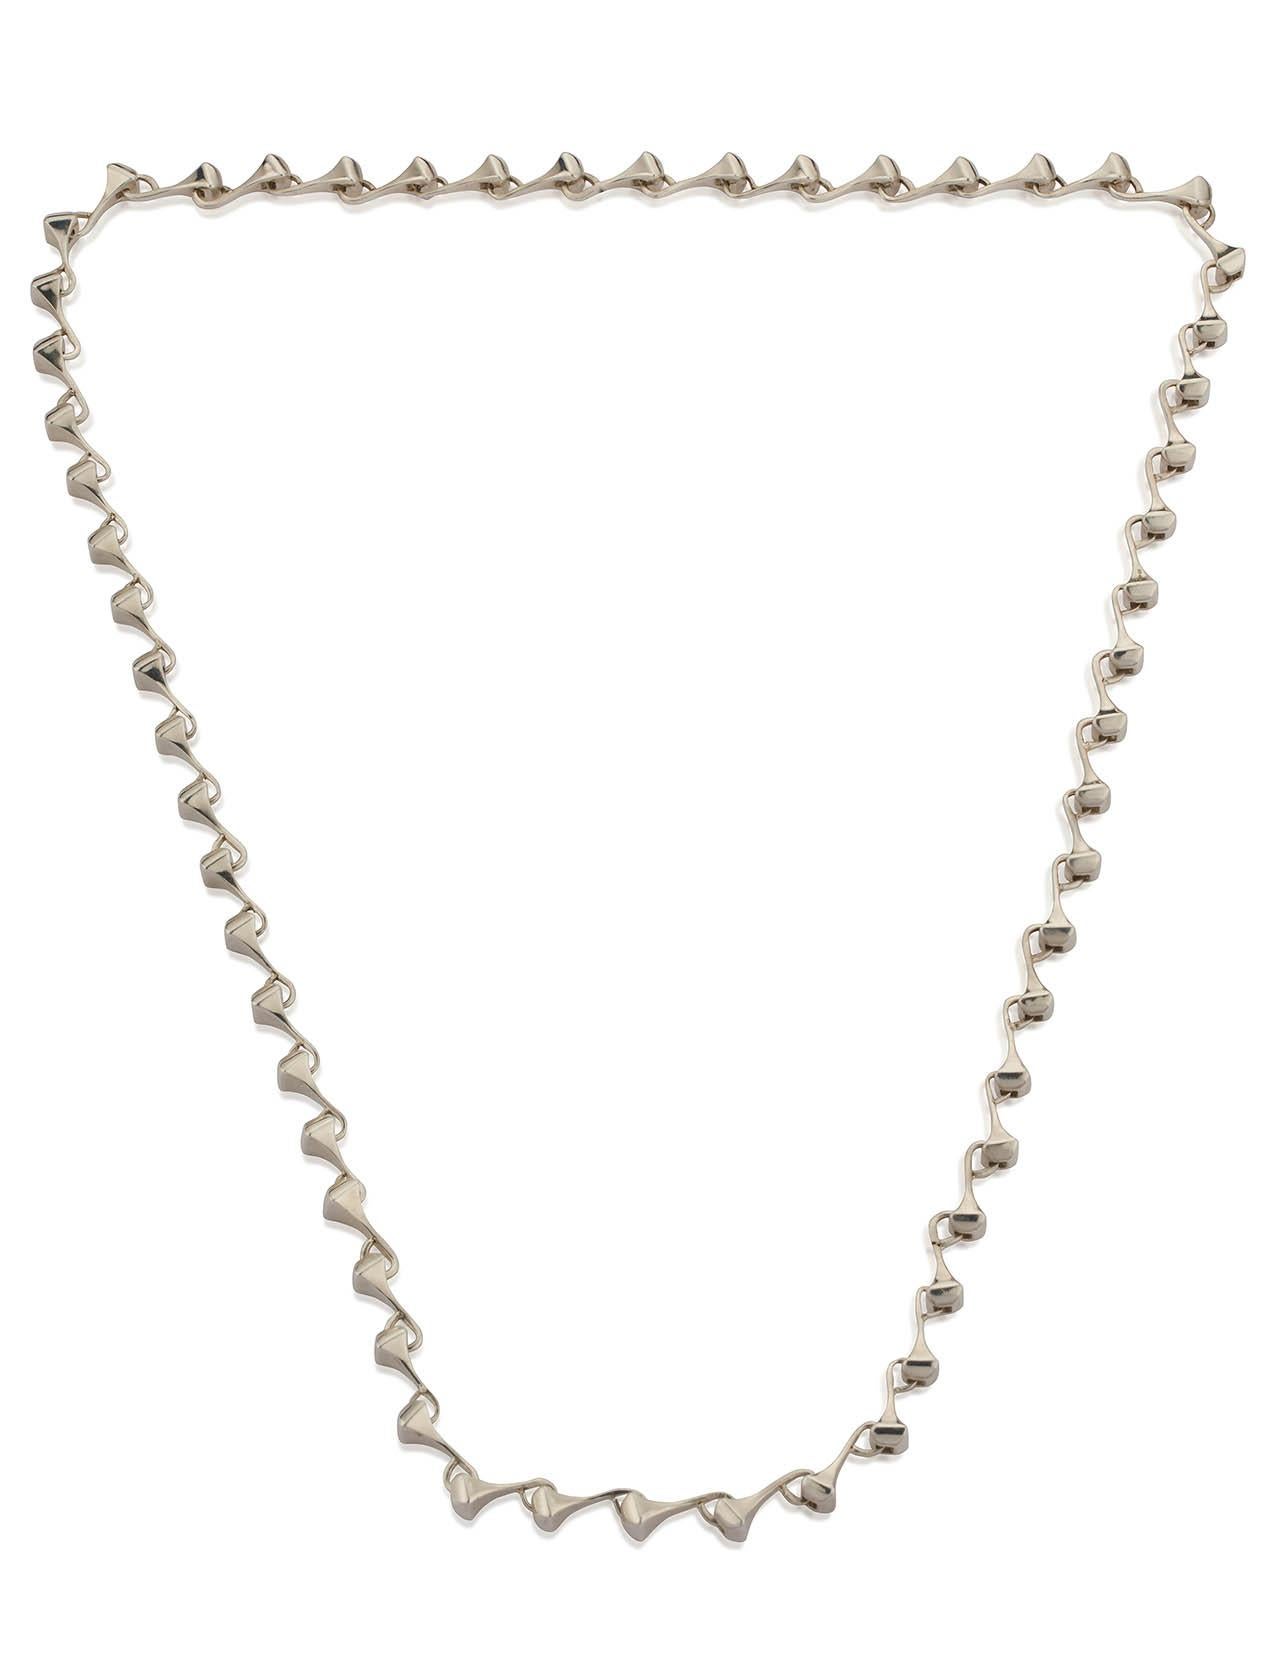 Long chain necklace in polished sterling silver with a gender neutral style
The design has a rock ‘n’ roll vibe and it is inspired by the equestrian world, as the links of the necklace have a shape which reminds the horseshoe nails. This collection